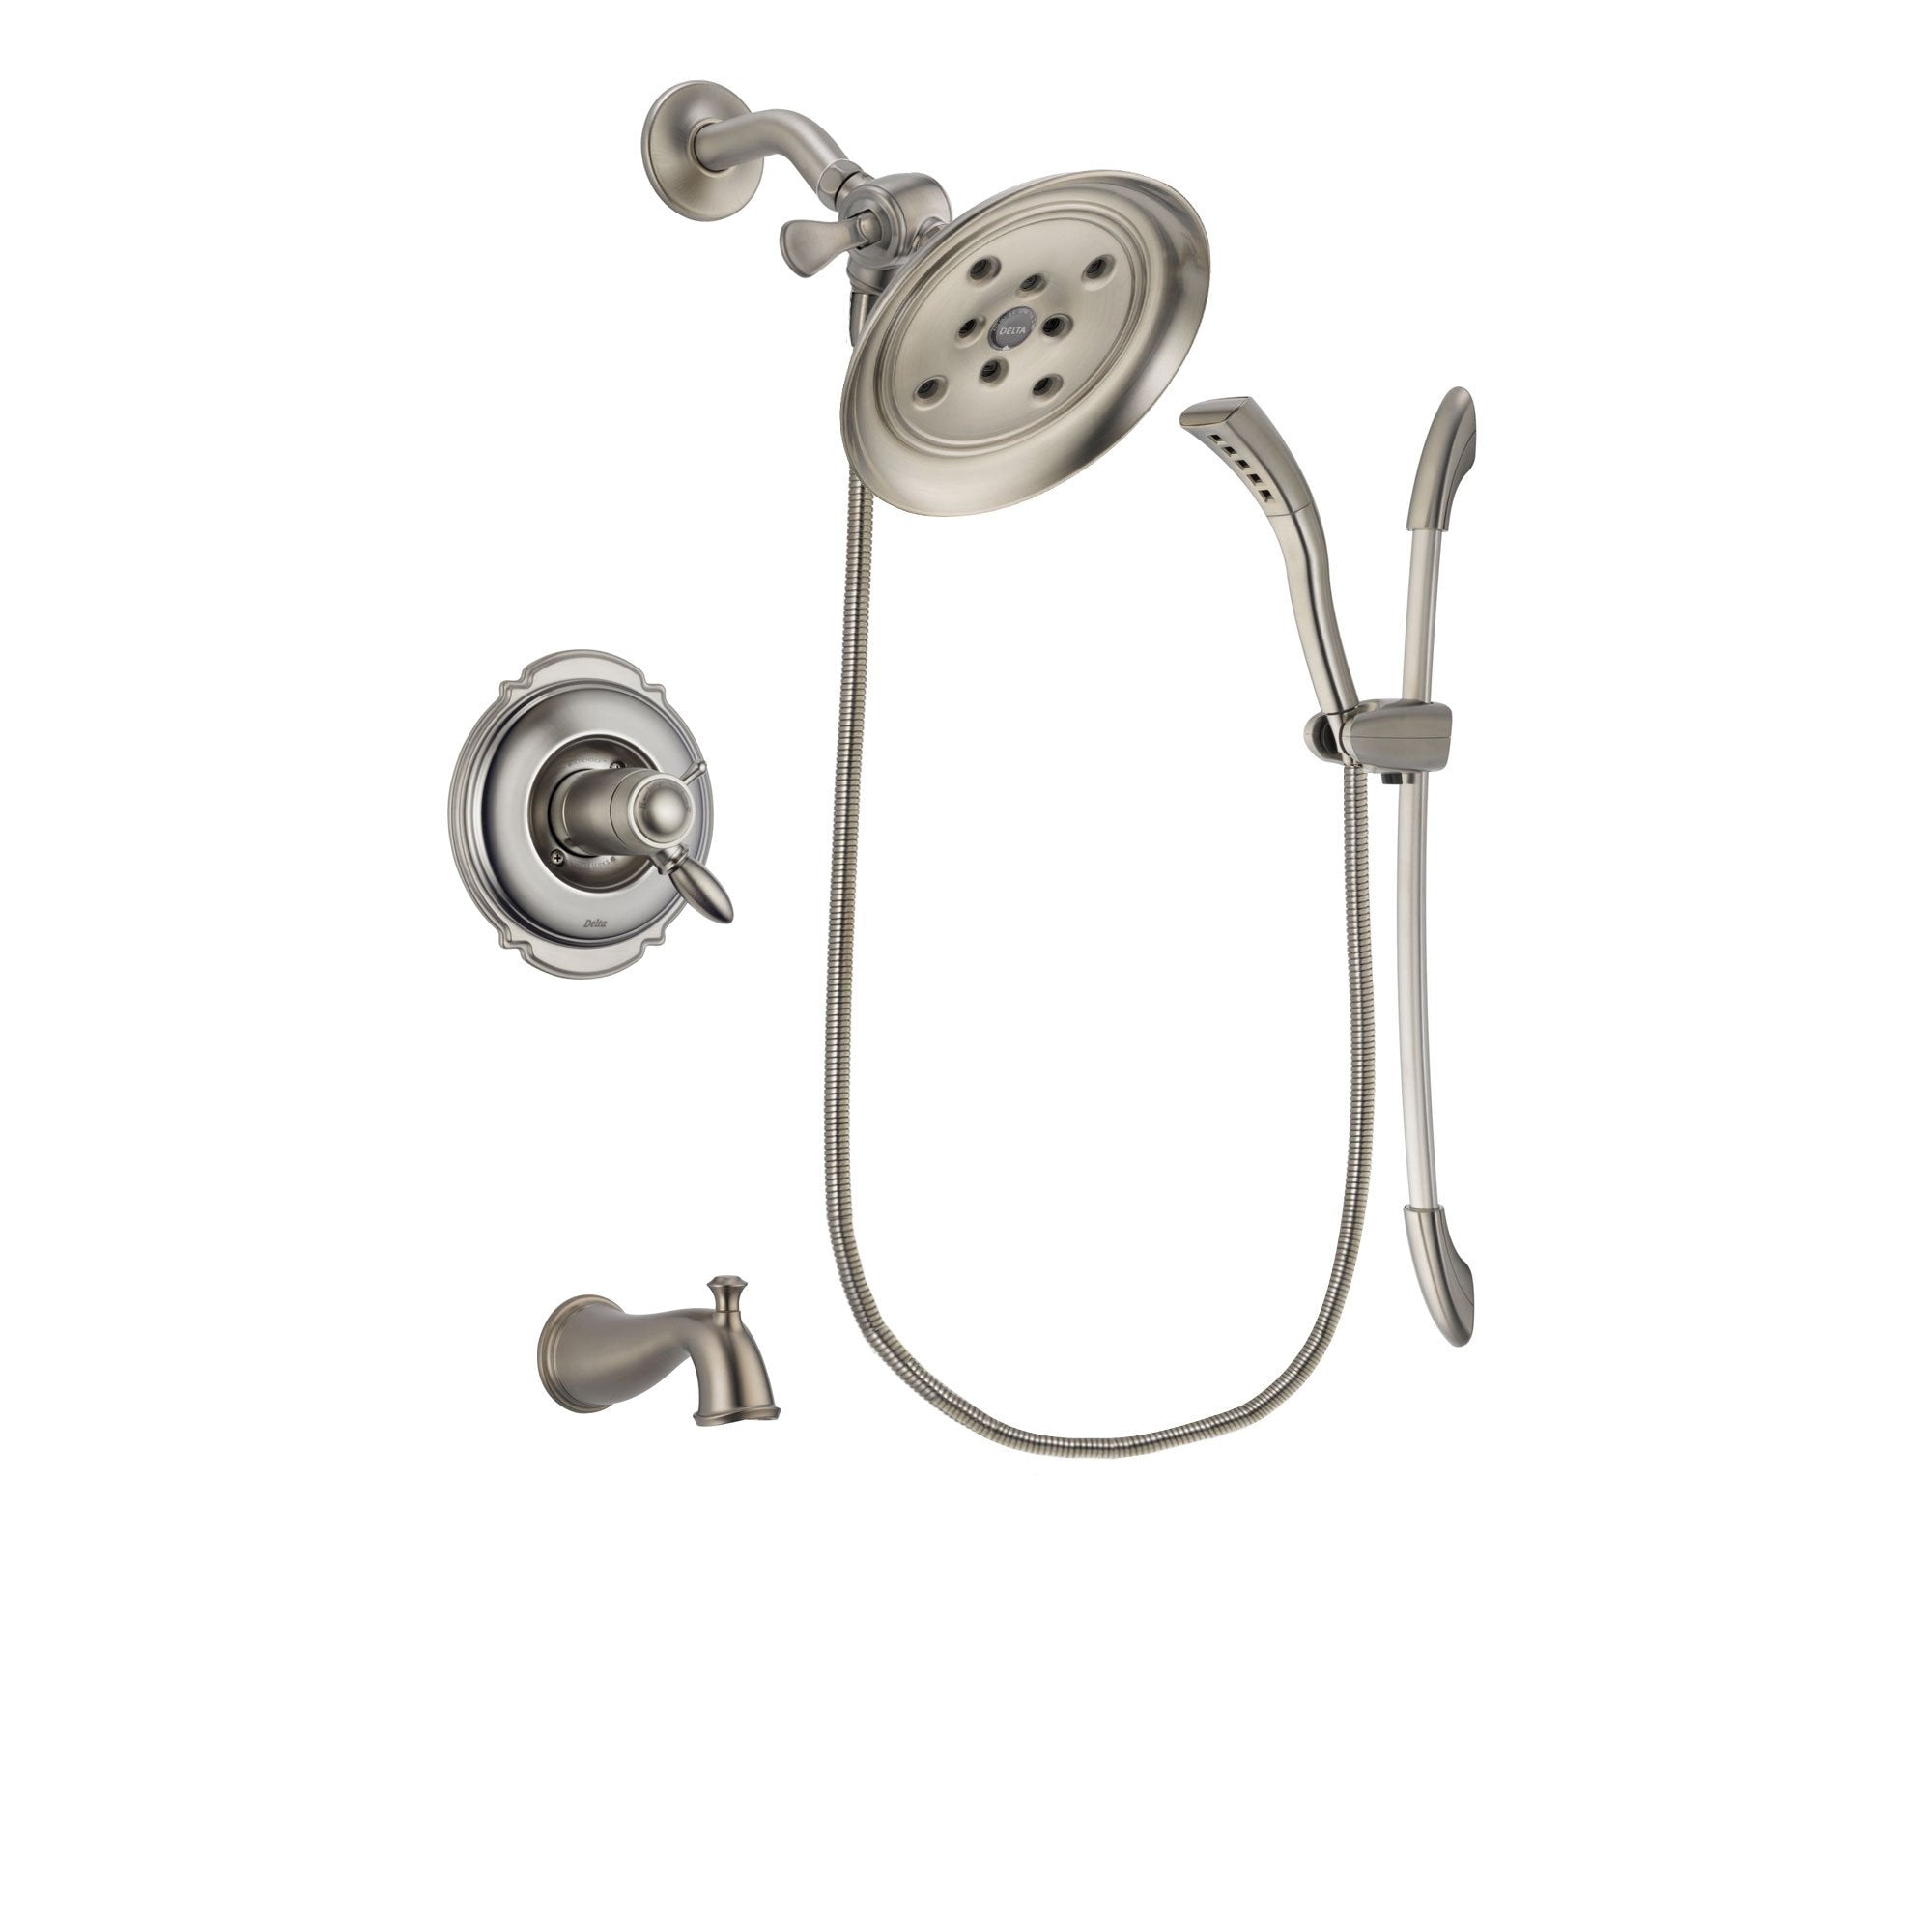 Delta Victorian Stainless Steel Finish Thermostatic Tub and Shower Faucet System Package with Large Rain Showerhead and Handshower with Slide Bar Includes Rough-in Valve and Tub Spout DSP1447V